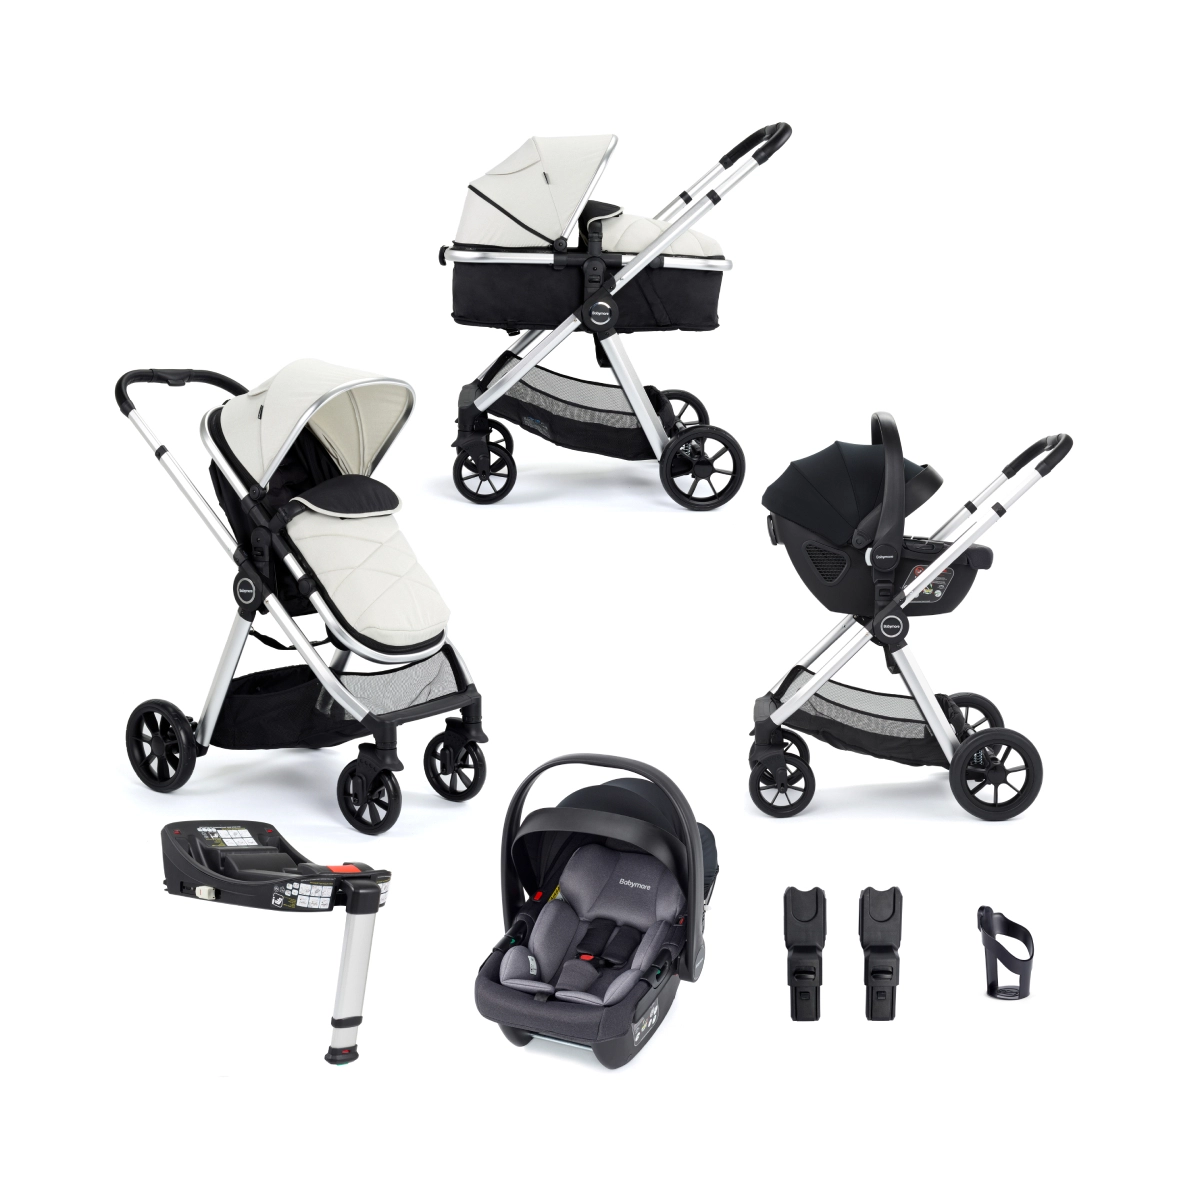 Babymore Mimi 3 in 1 Travel System Bundle with Coco i-Size Car Seat with Isofix Base